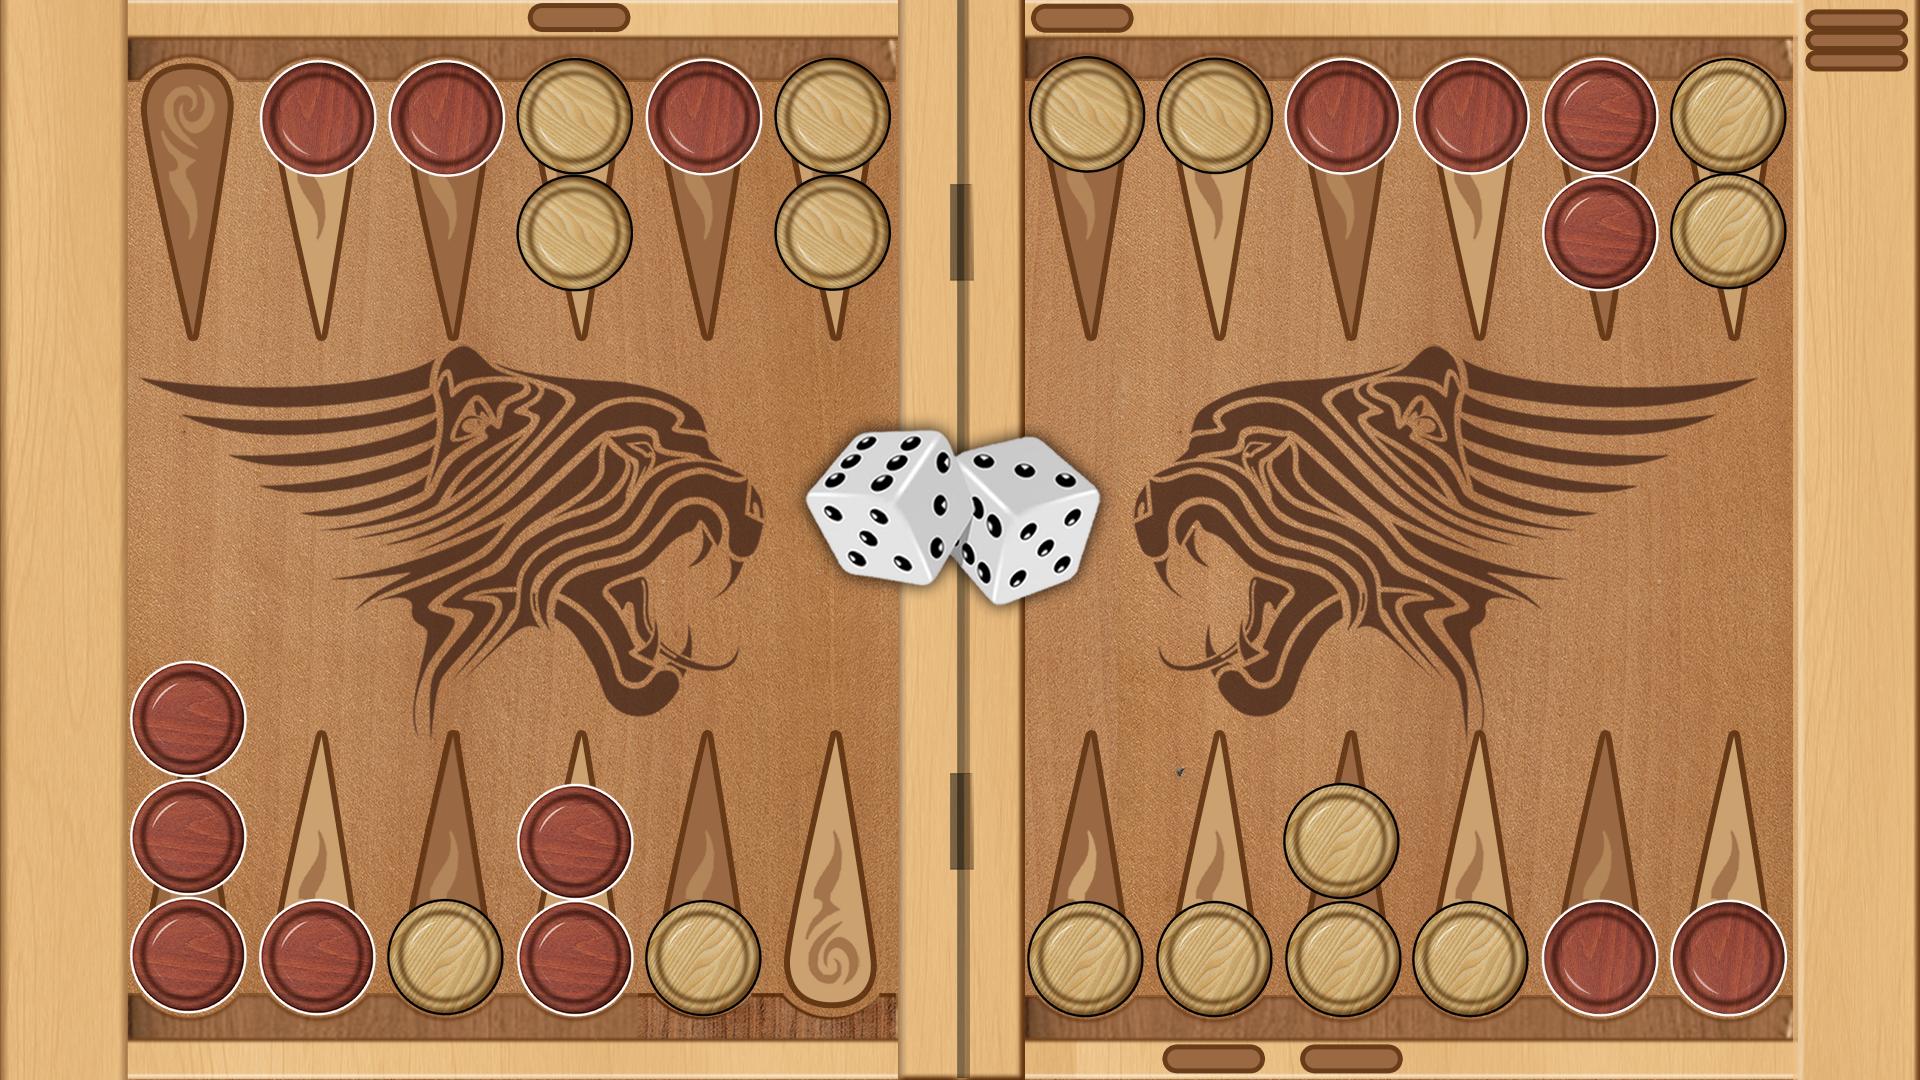 Backgammon online and offline for Android - APK Download